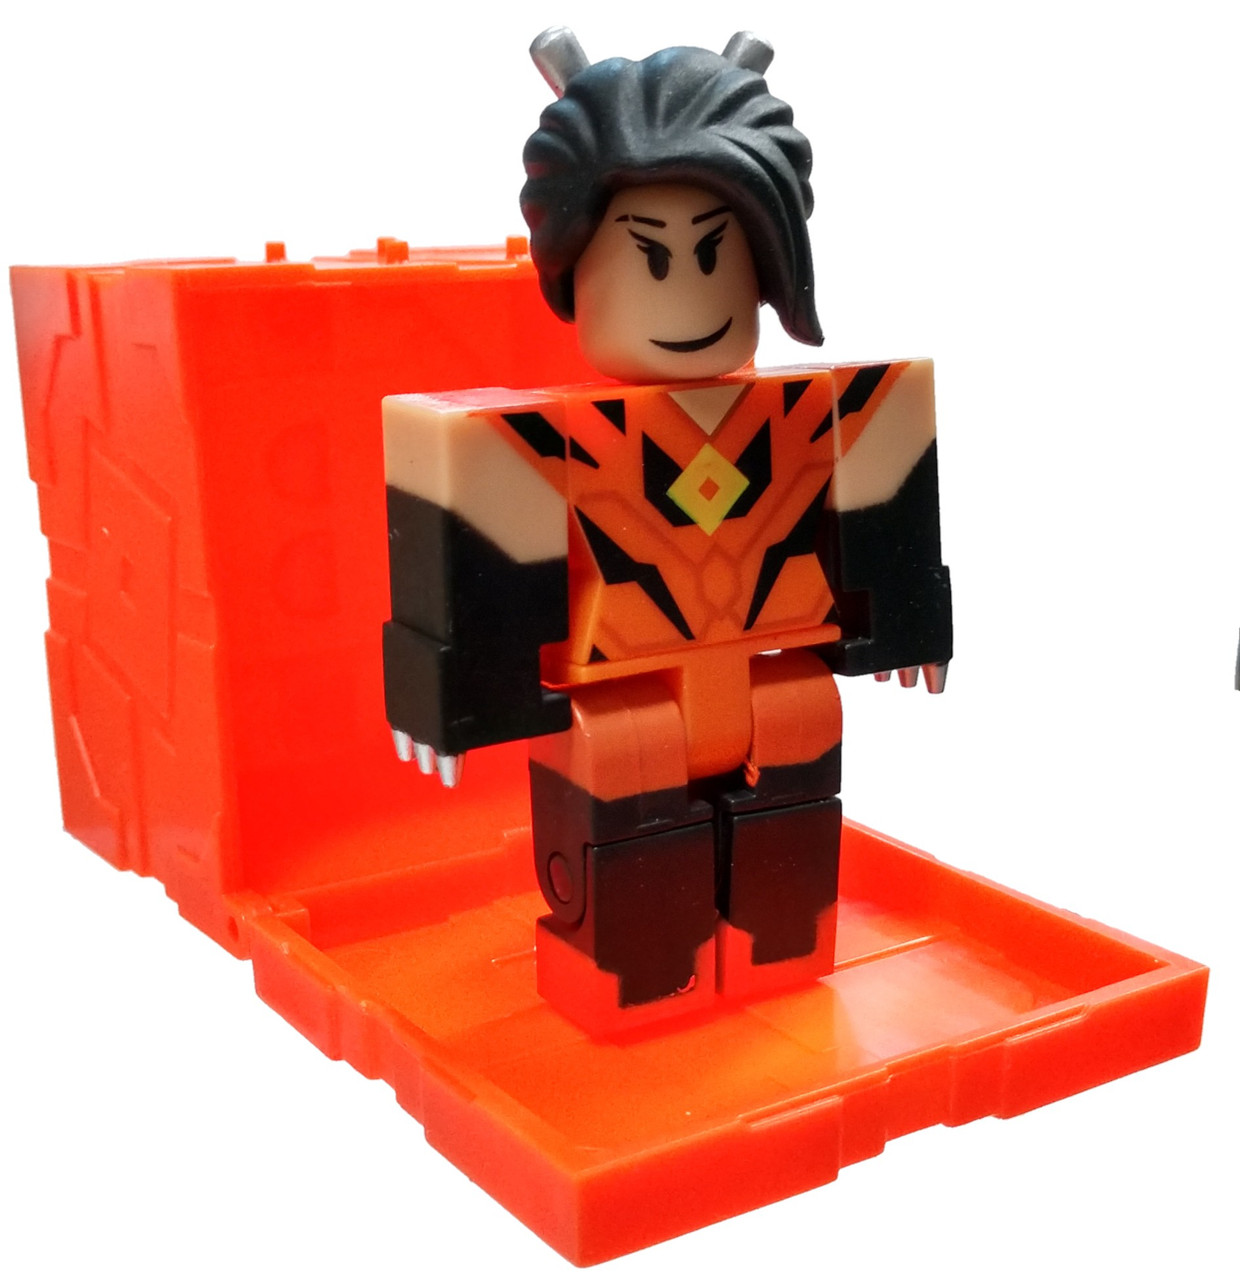 Roblox Dued1 Mini Figure Includes Online Code Loose Film Tv Videospiele - roblox dued1 mini figure includes online code loose